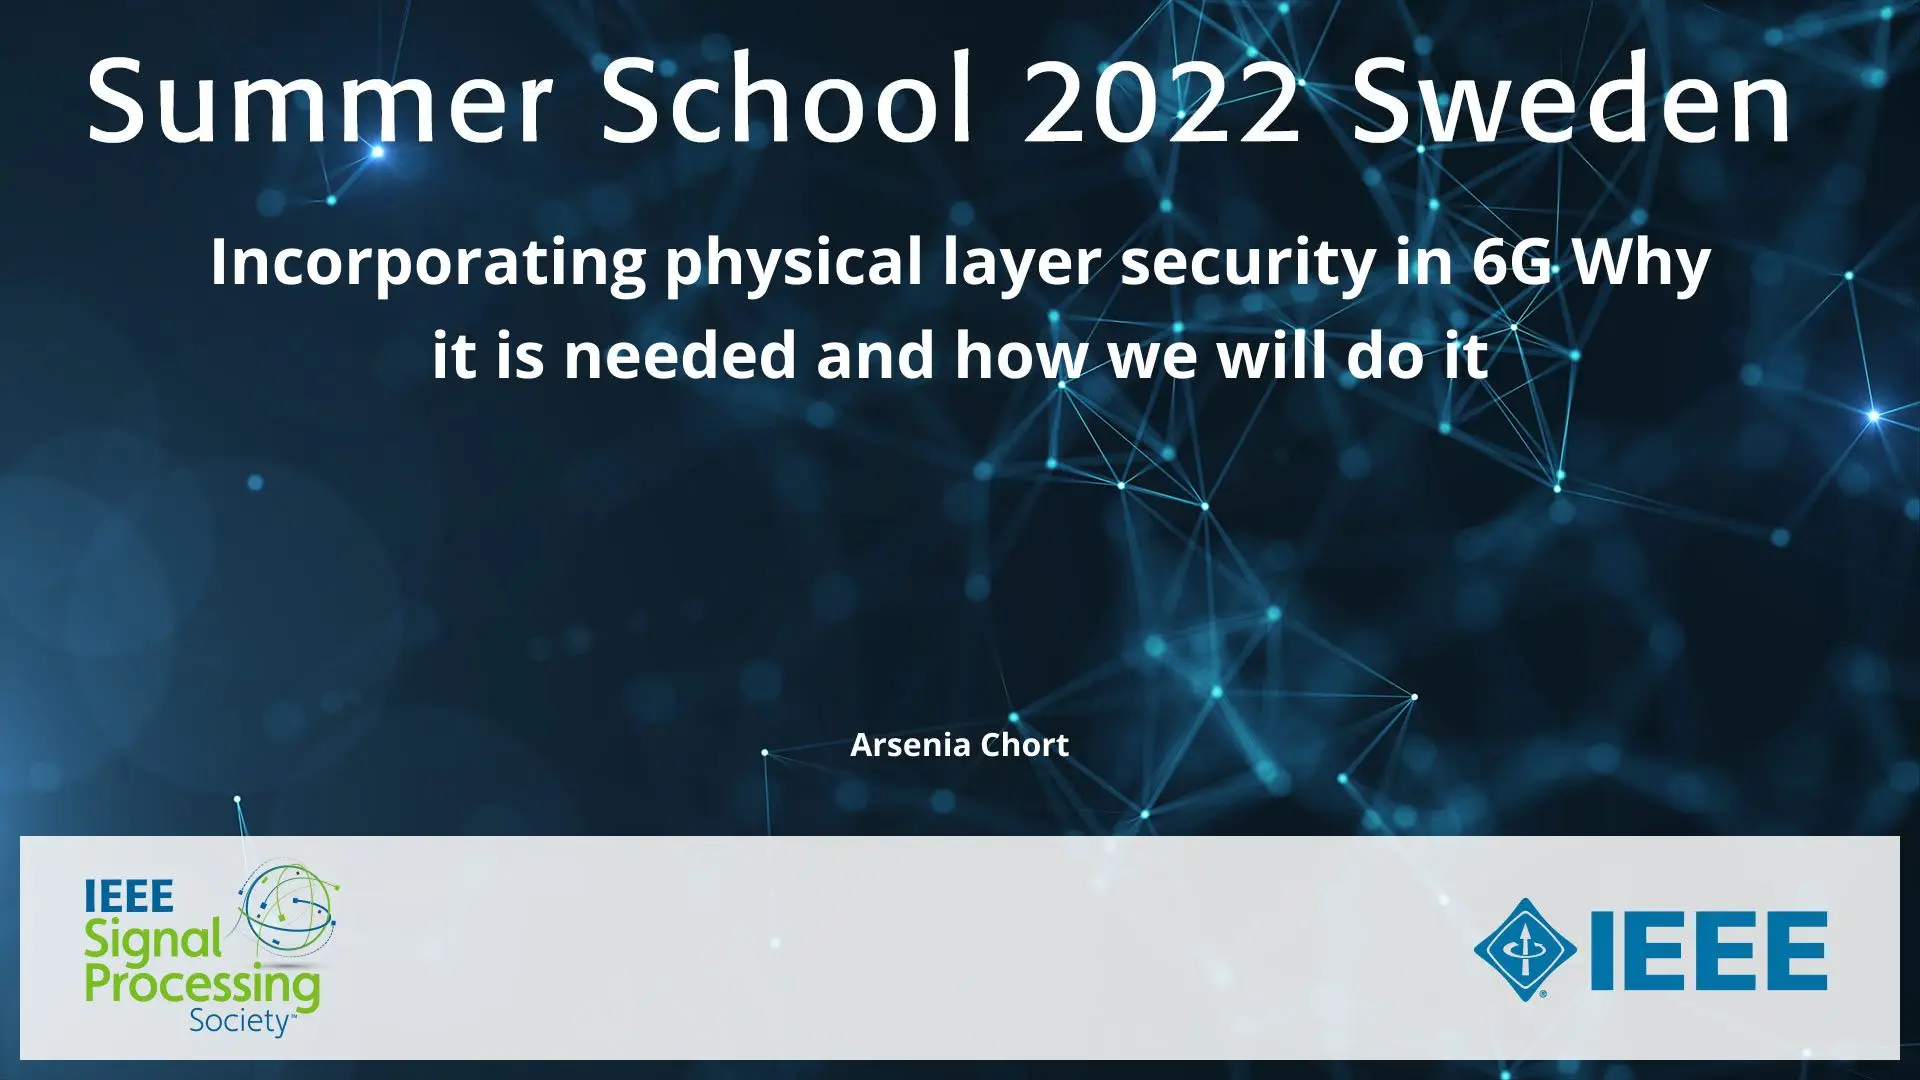 Incorporating physical layer security in 6G Why it is needed and how we will do it